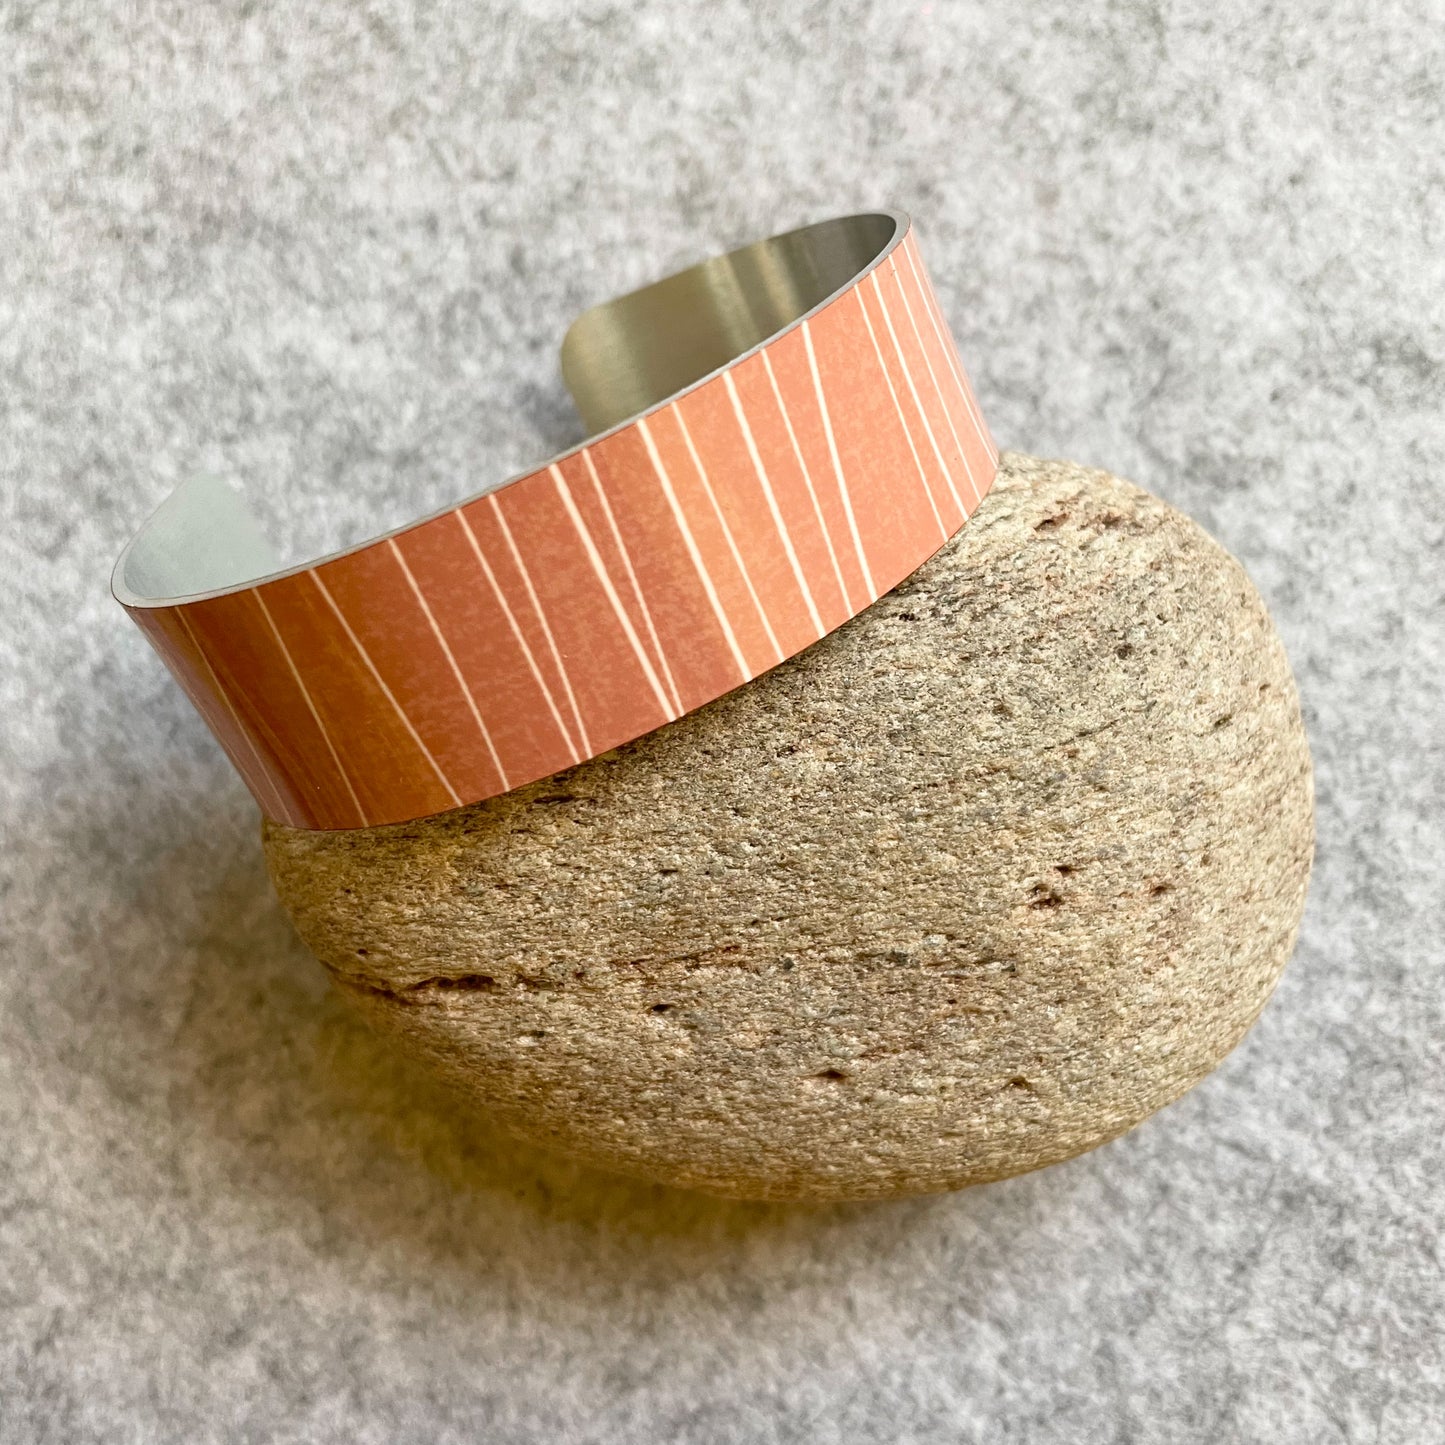 Still As Your Sleeping Collection: Old Sandstone Cuff Bracelet